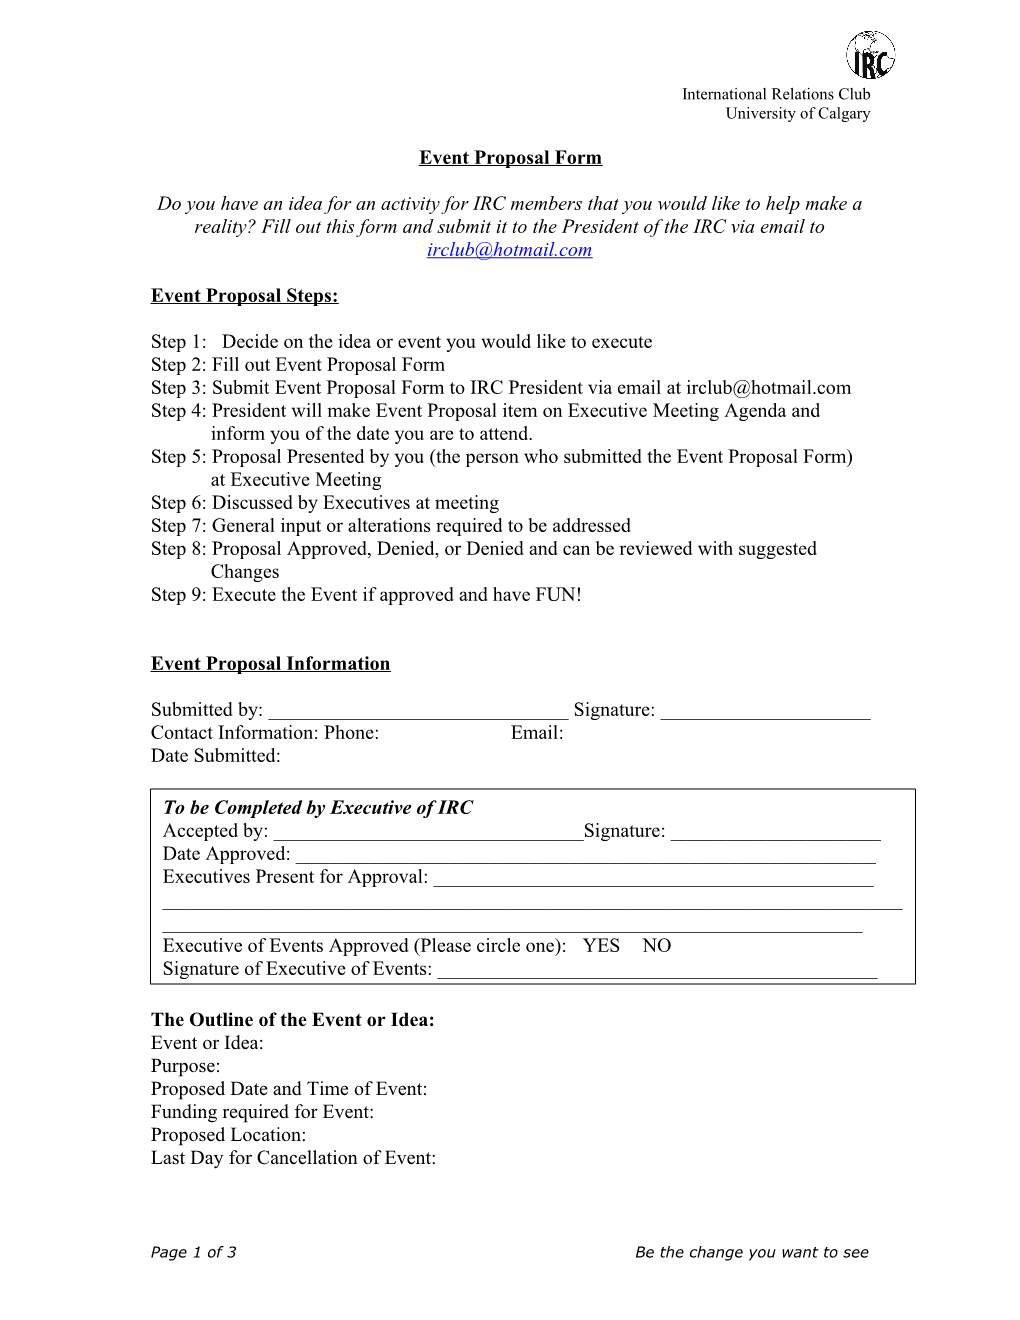 Event Proposal Form